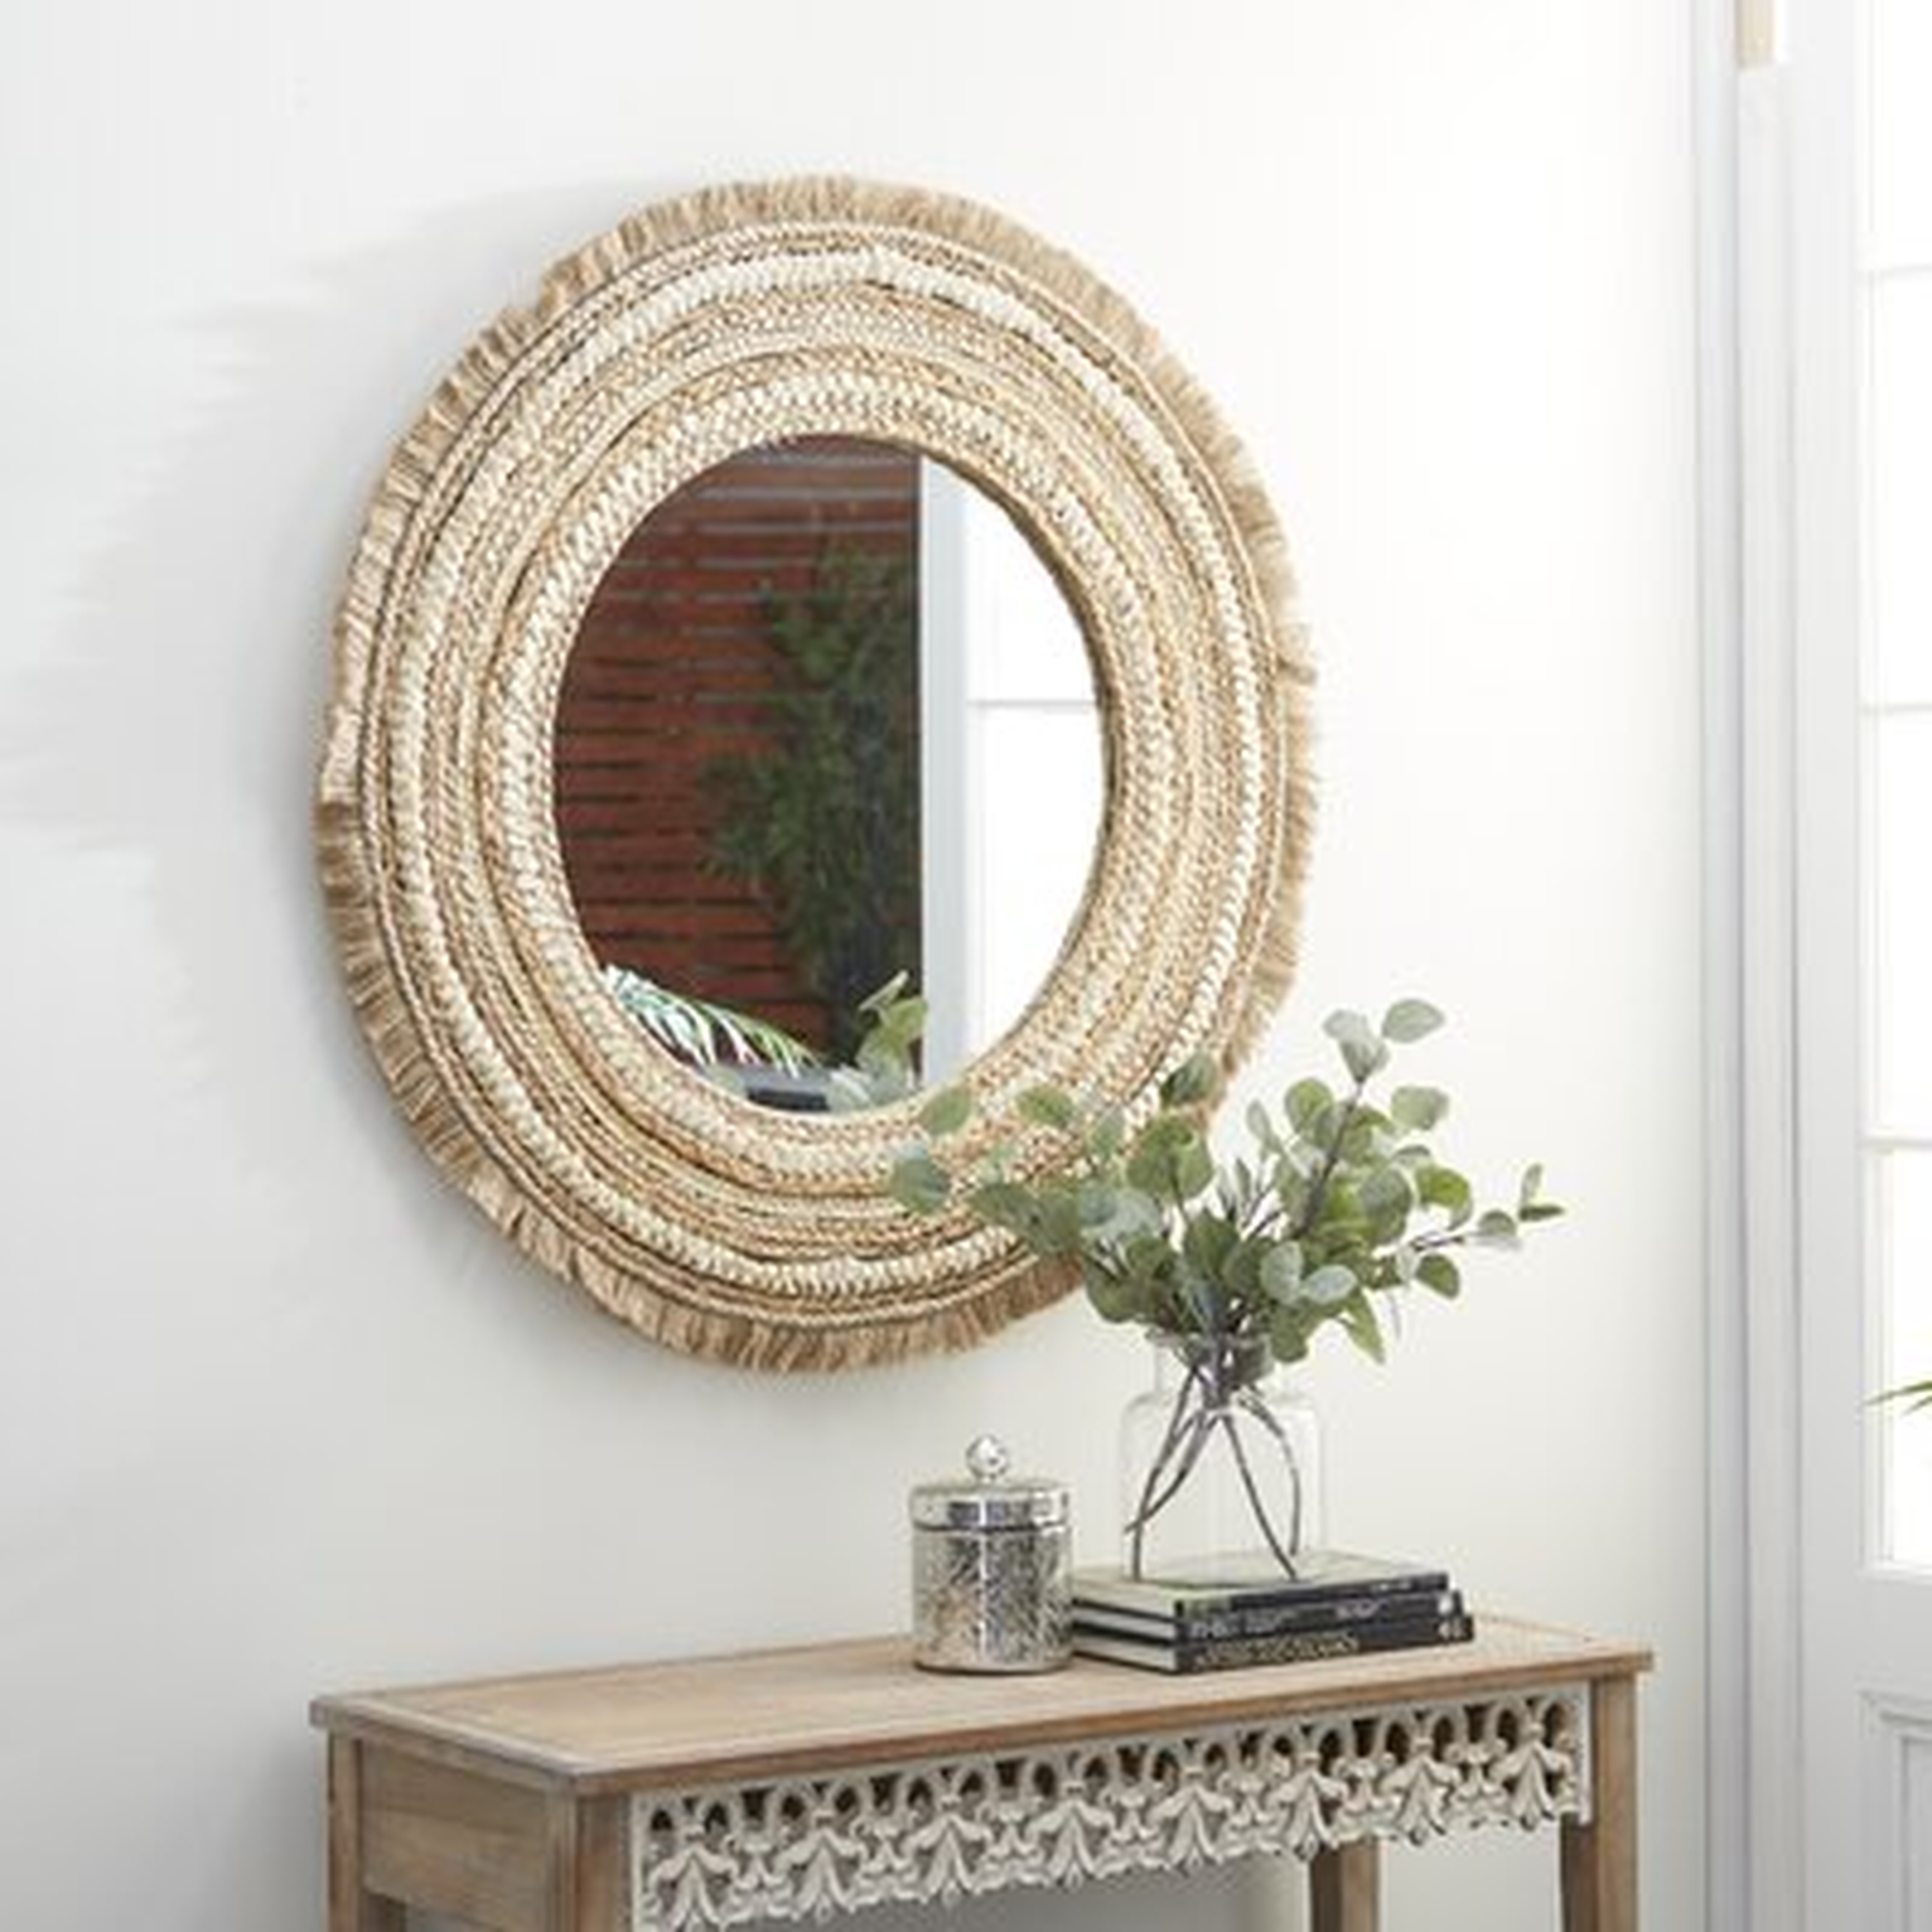 Large Round Wood And Wicker Beige Wall Mirror 38"D - Wayfair